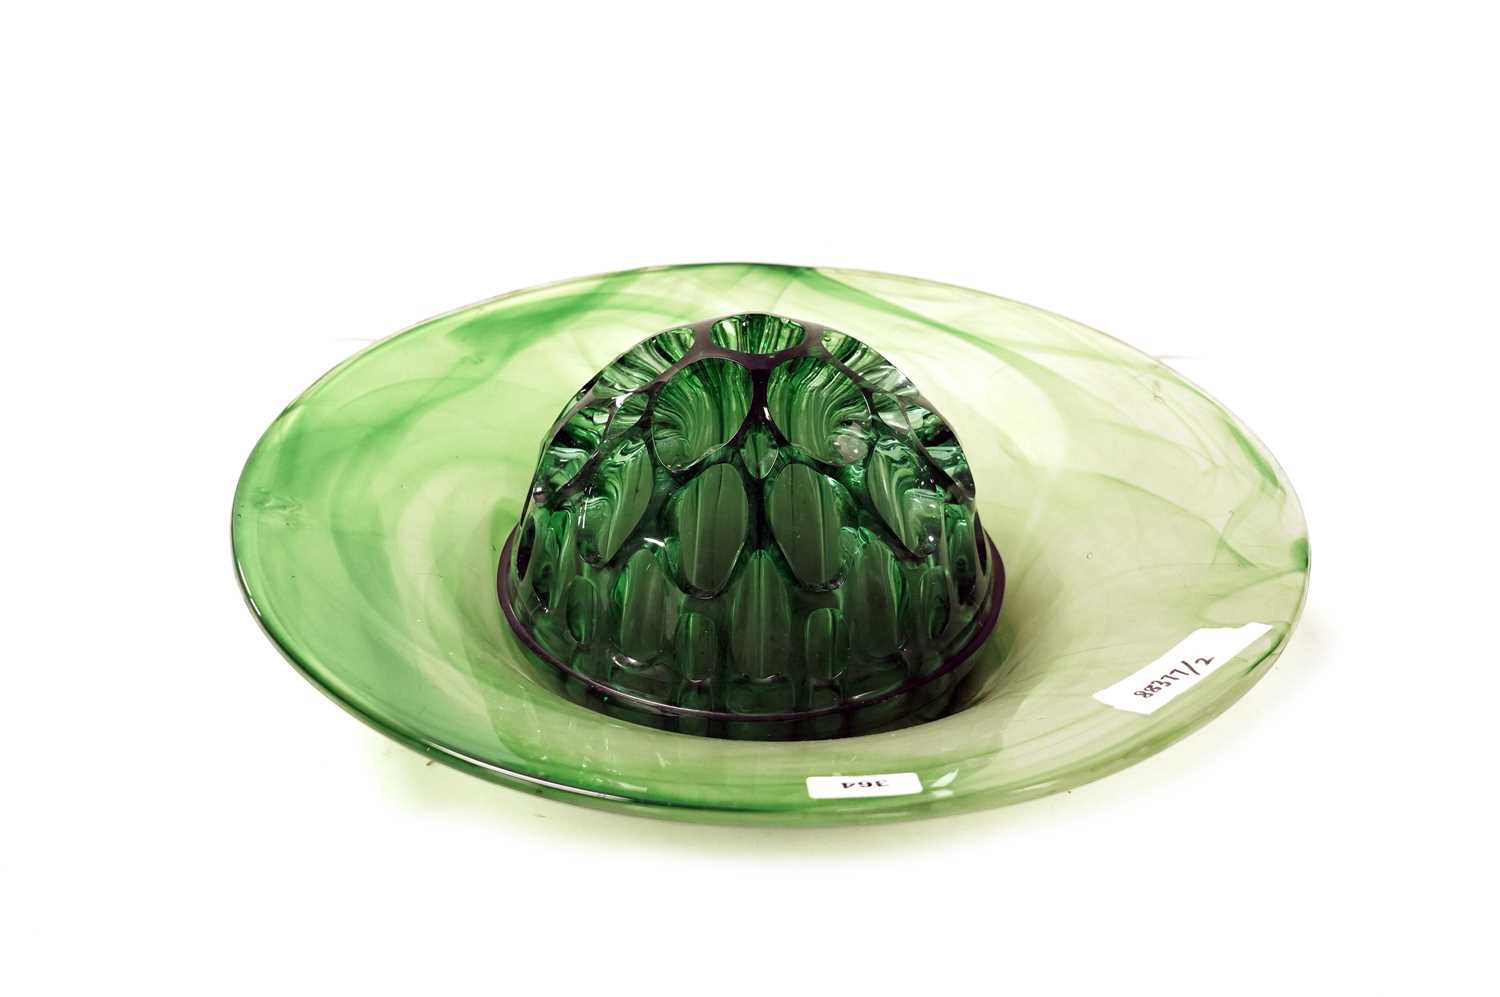 A 1930s George Davidson cloud glass bowl in green and a green glass rose bowl